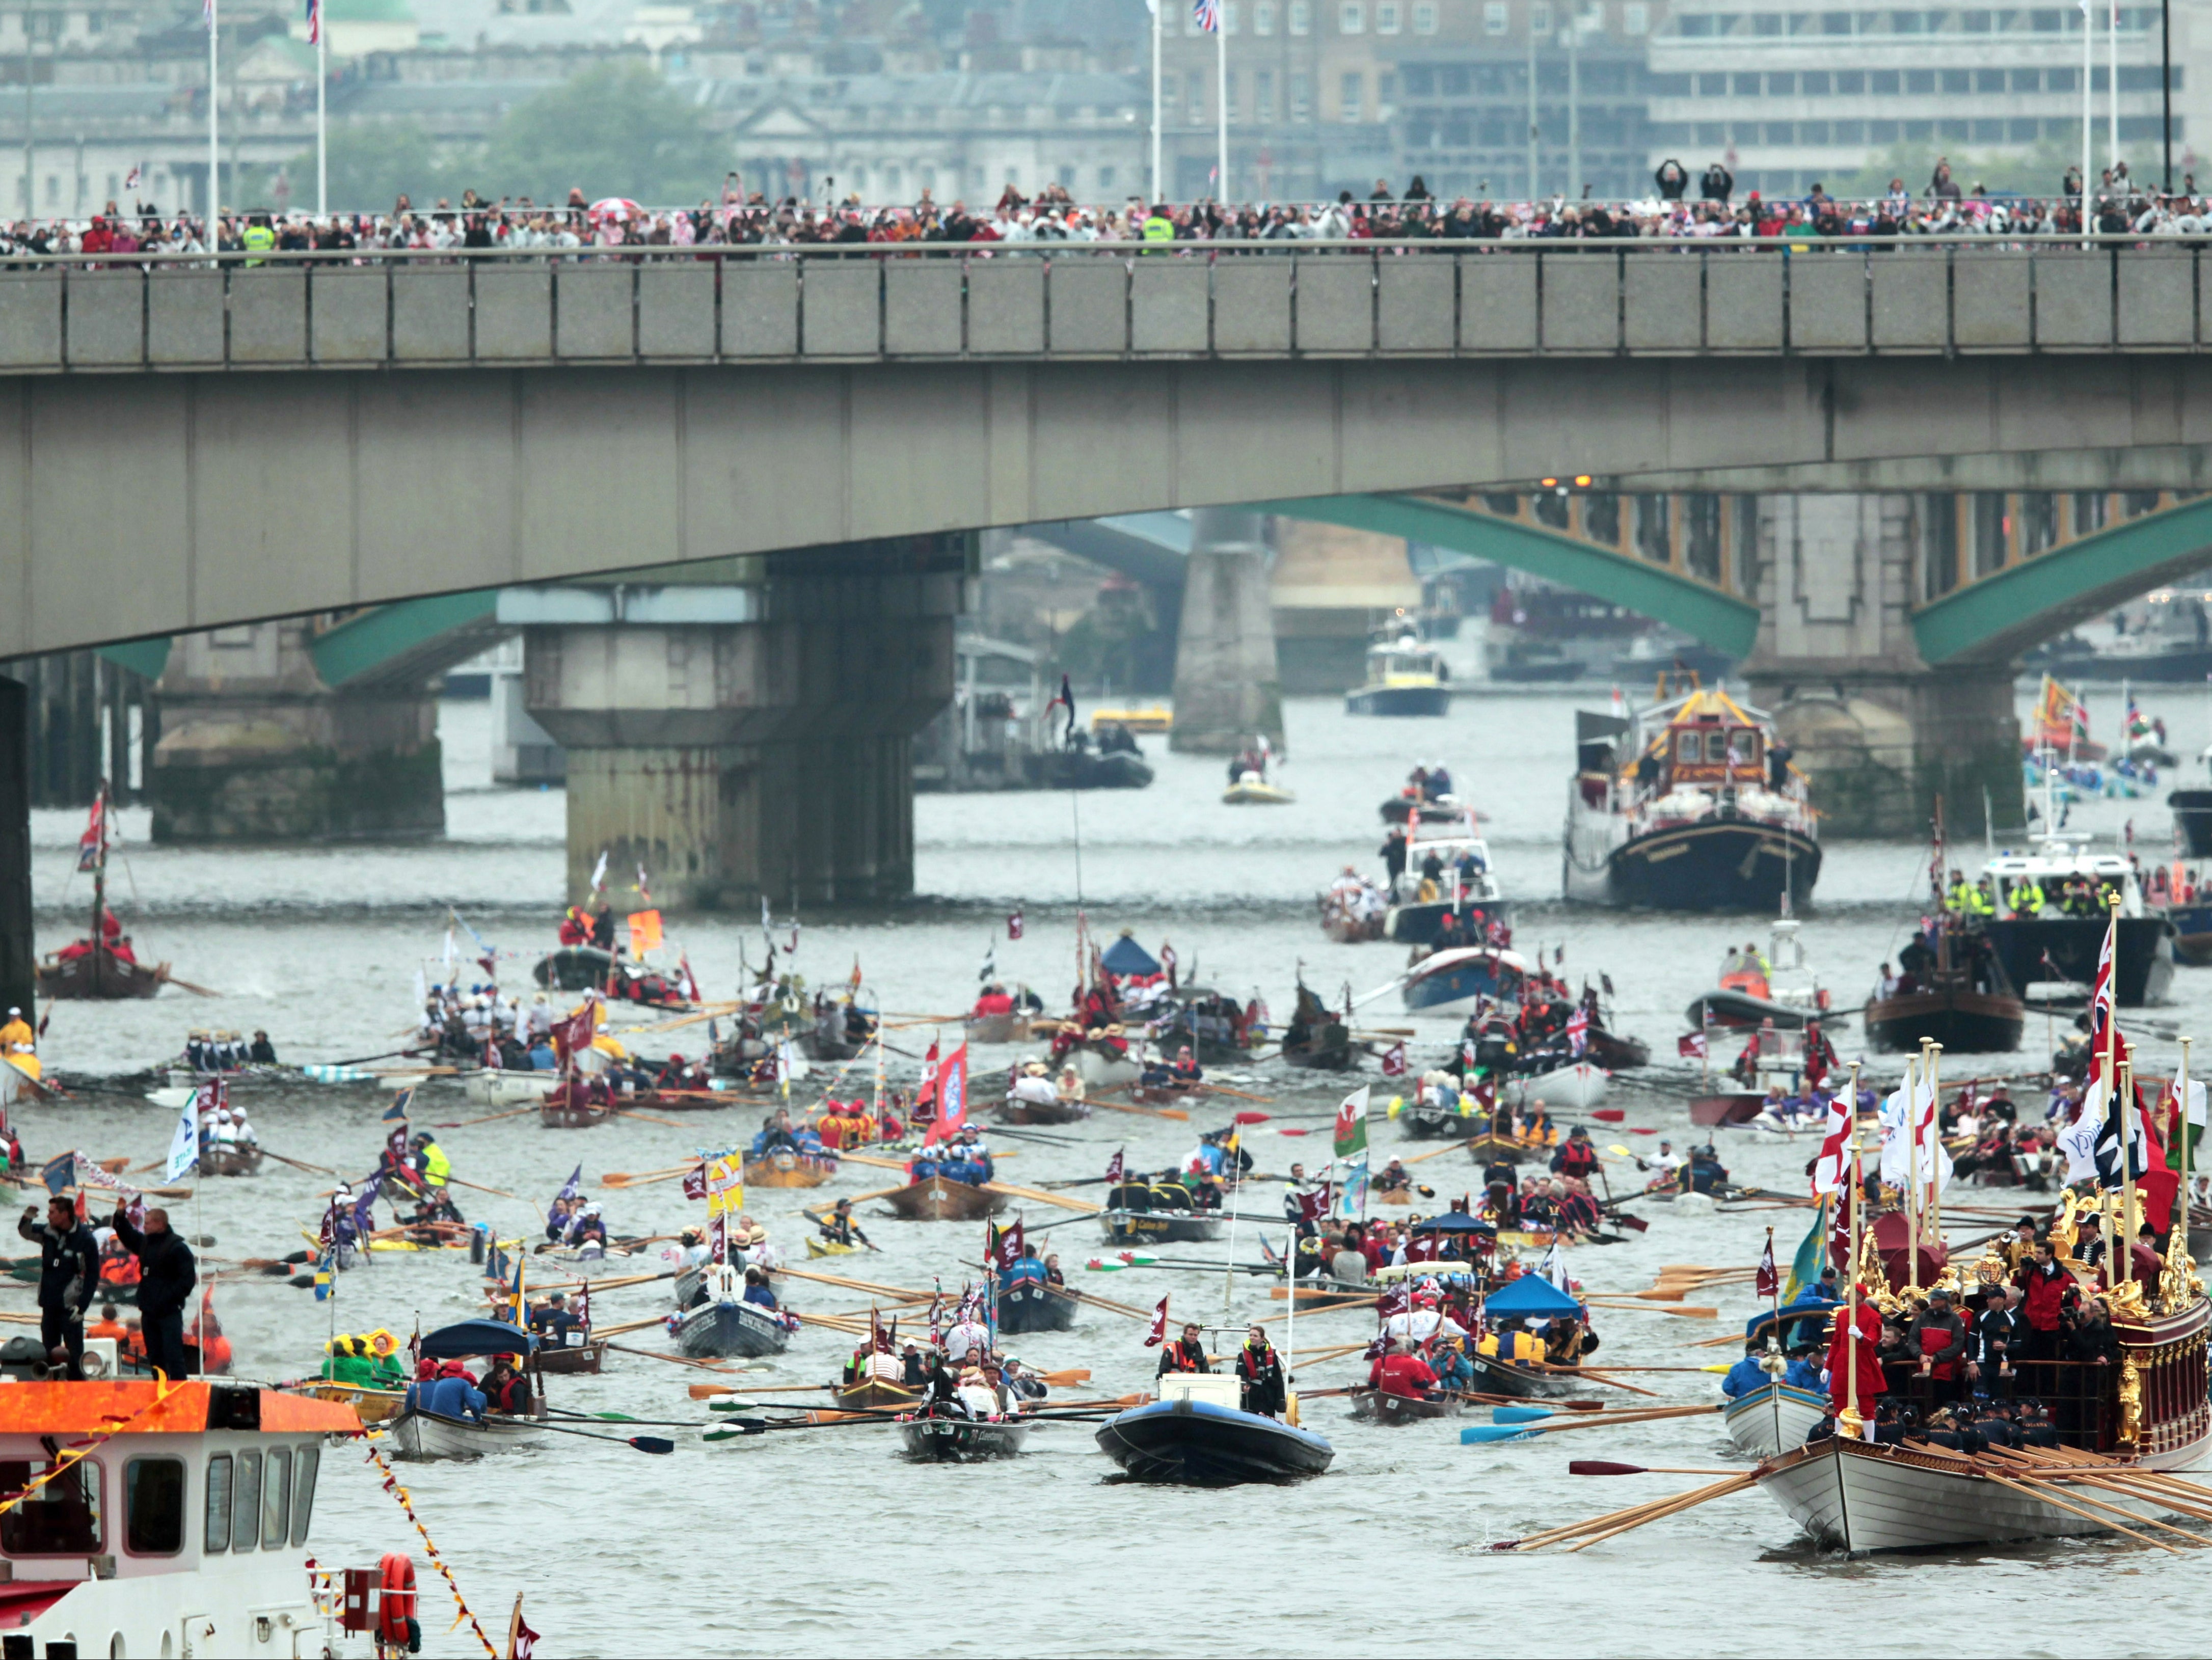 Rowbarge Gloriana (R) leads the manpowered section past HMS Belfast (L) of the Diamond Jubilee River Pageant during the Queen Elizabeth's Diamond Jubilee Pageant on the River Thames in London